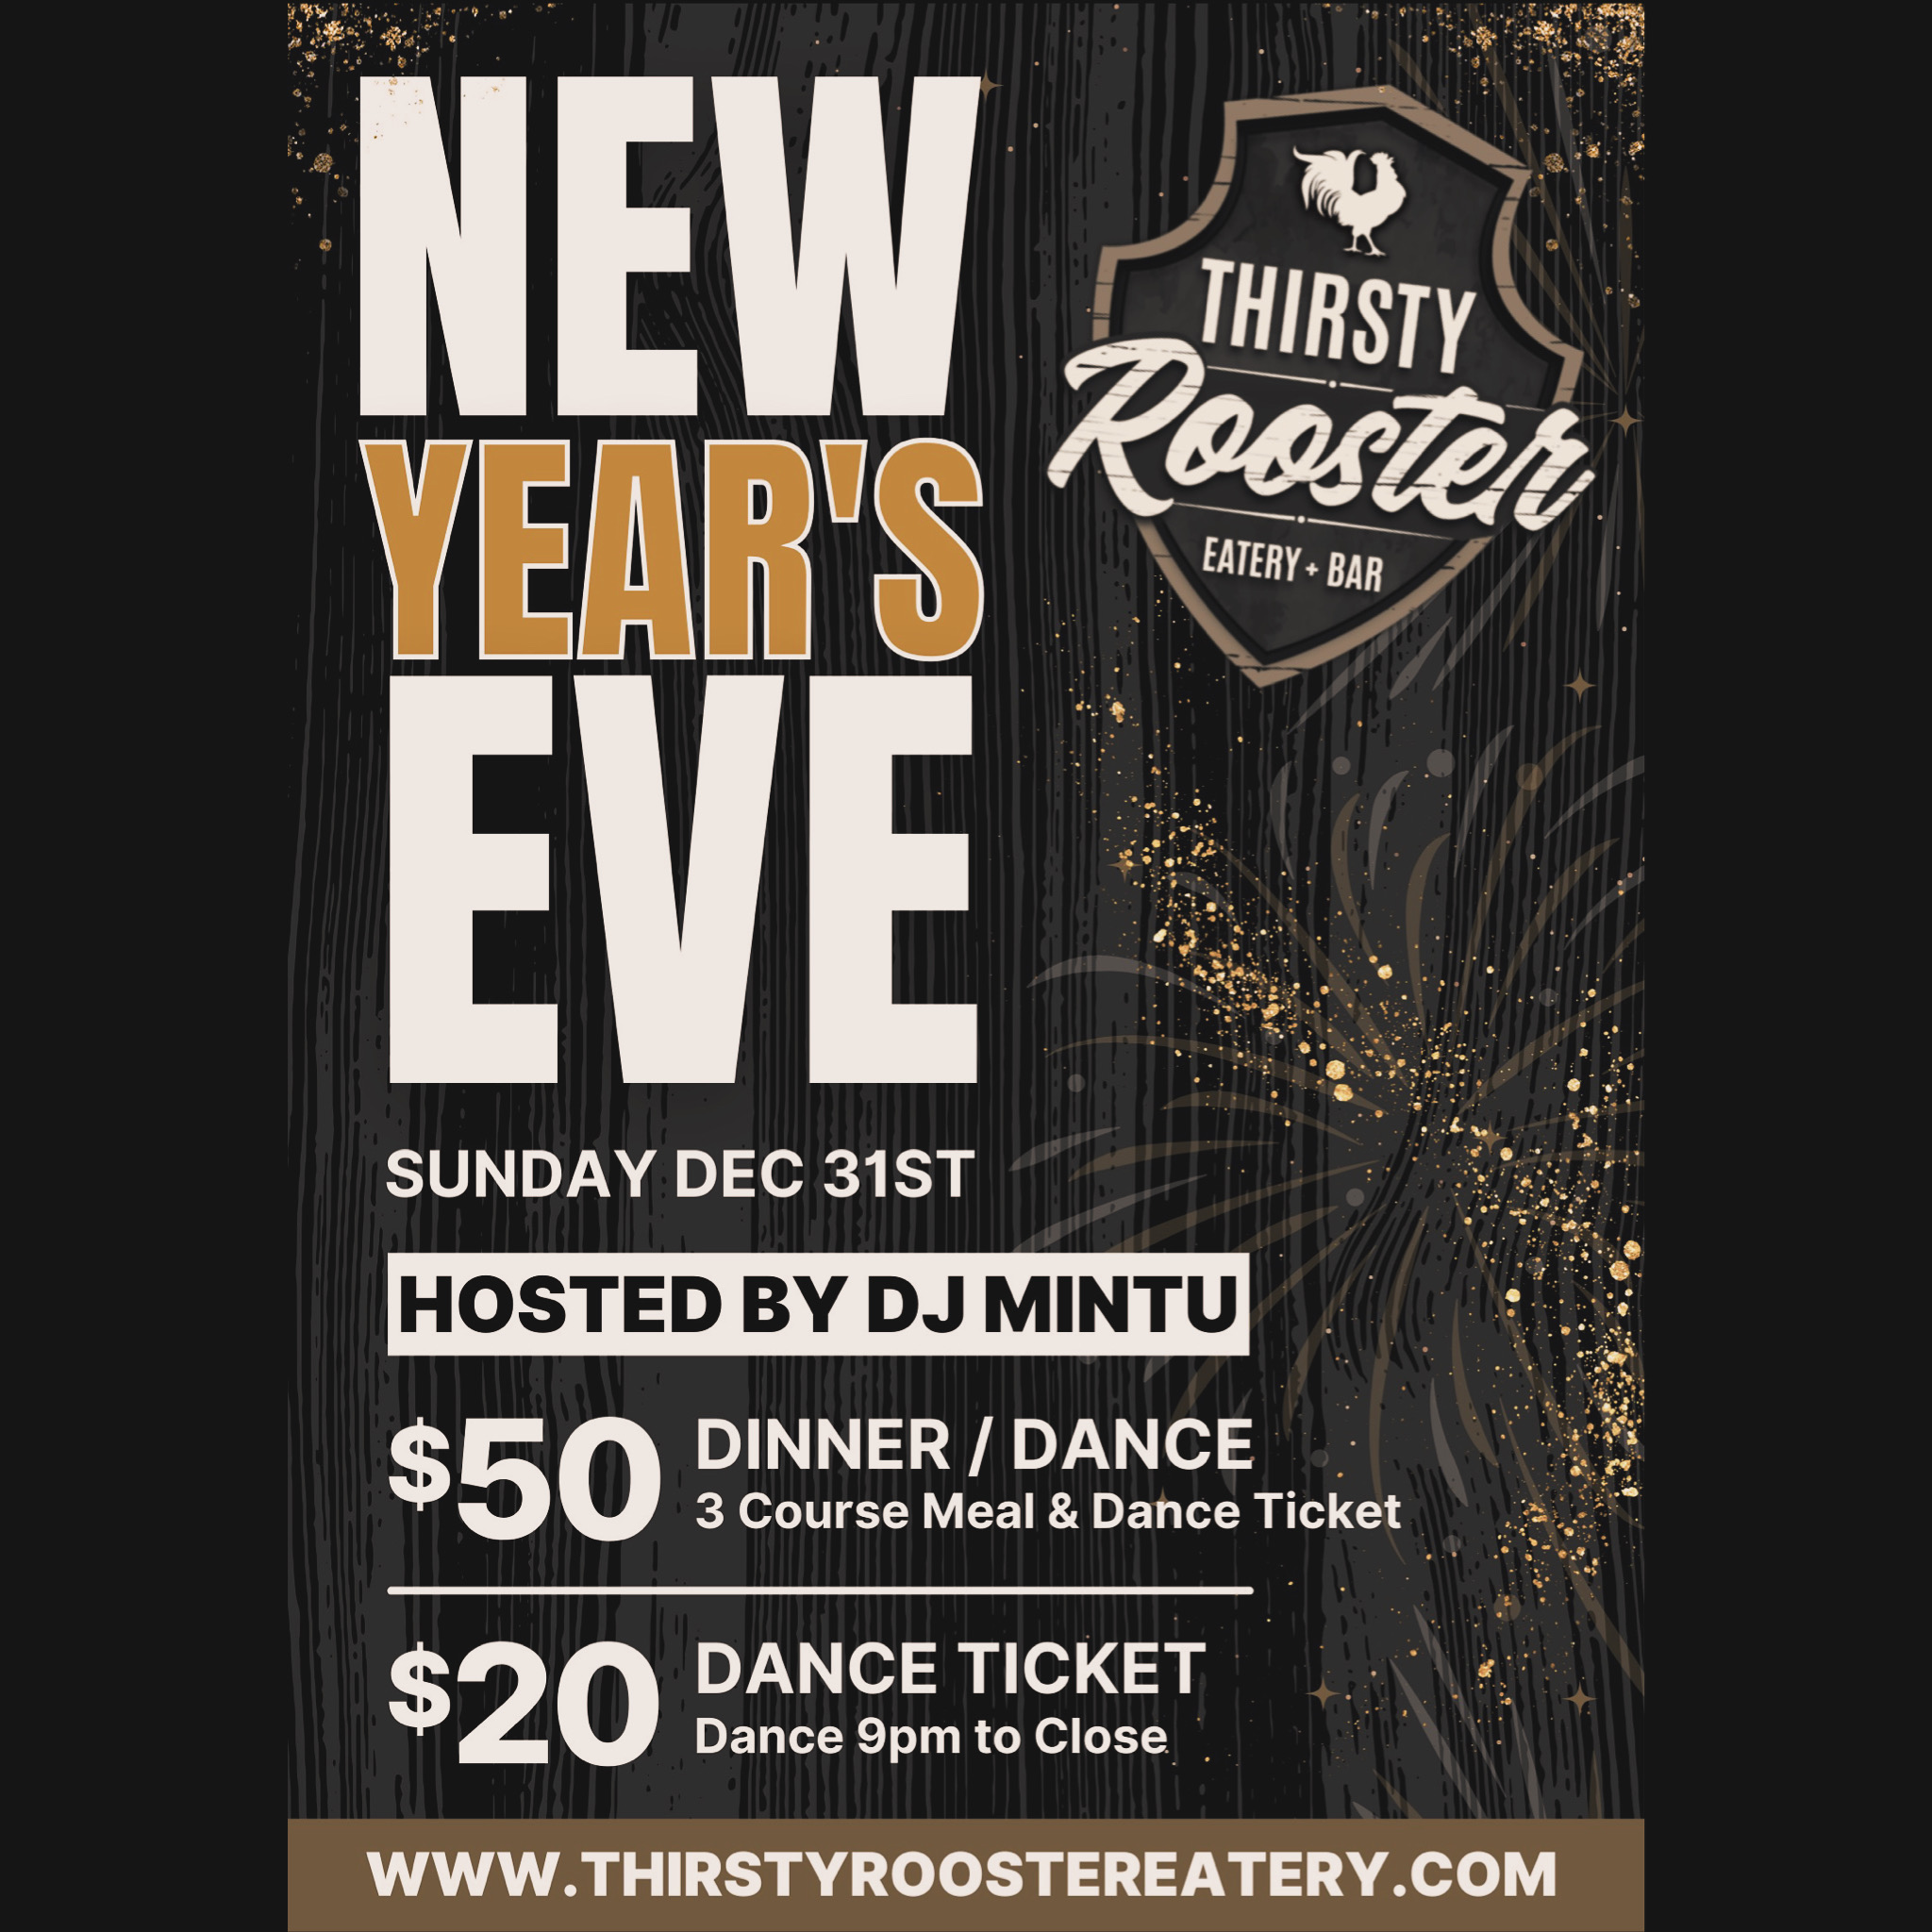 New Year’s Eve at Thirsty Rooster Eatery